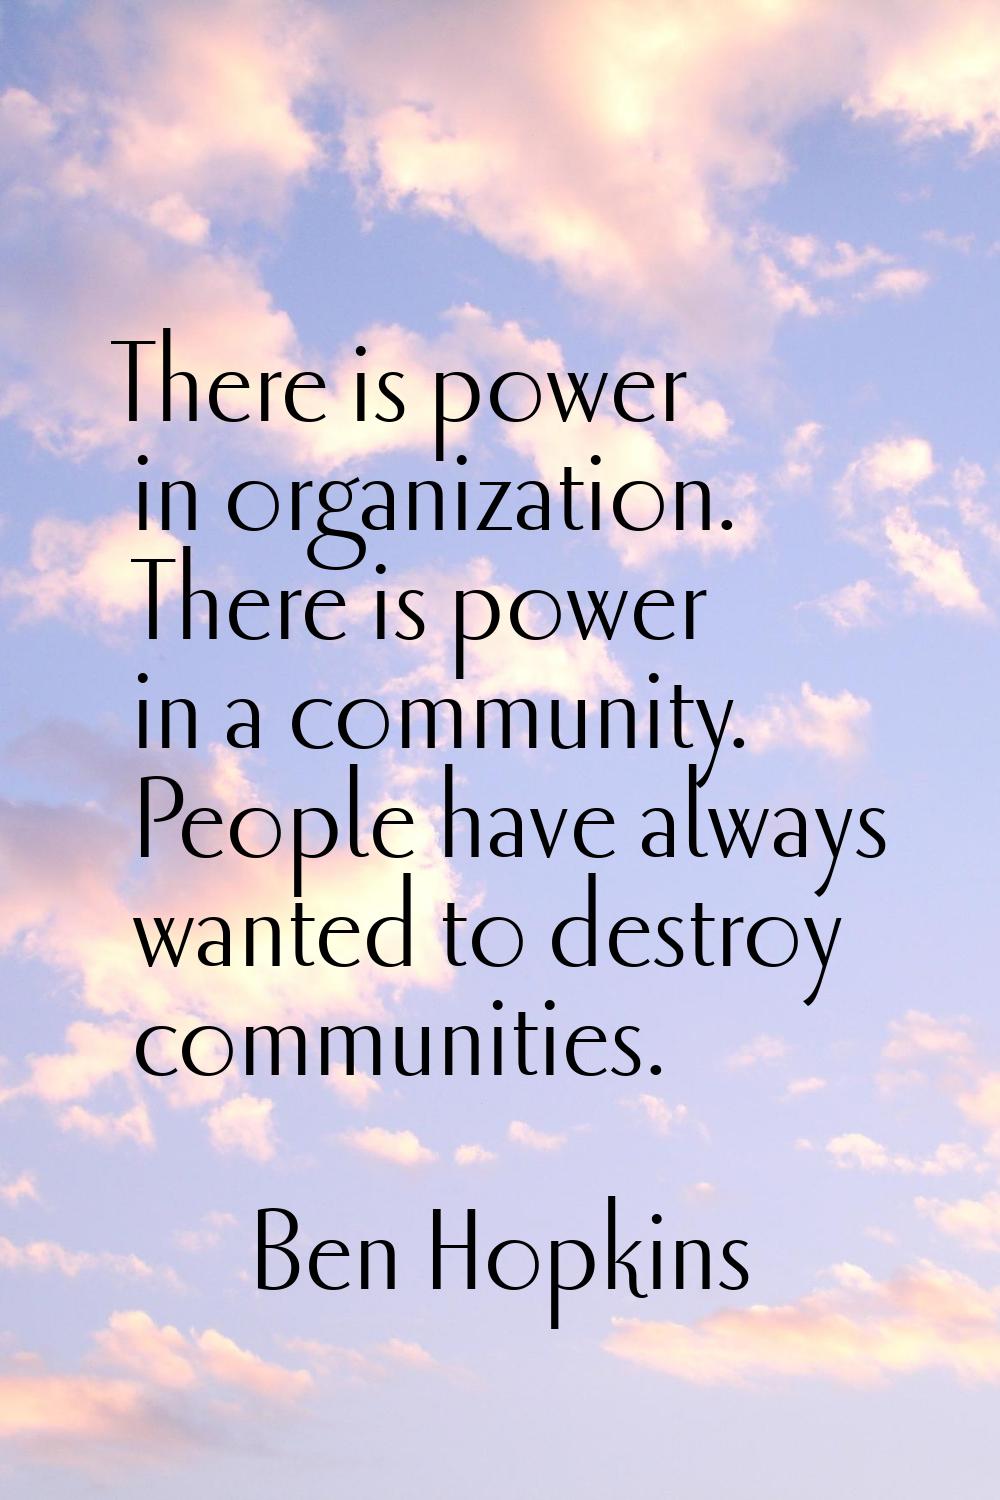 There is power in organization. There is power in a community. People have always wanted to destroy